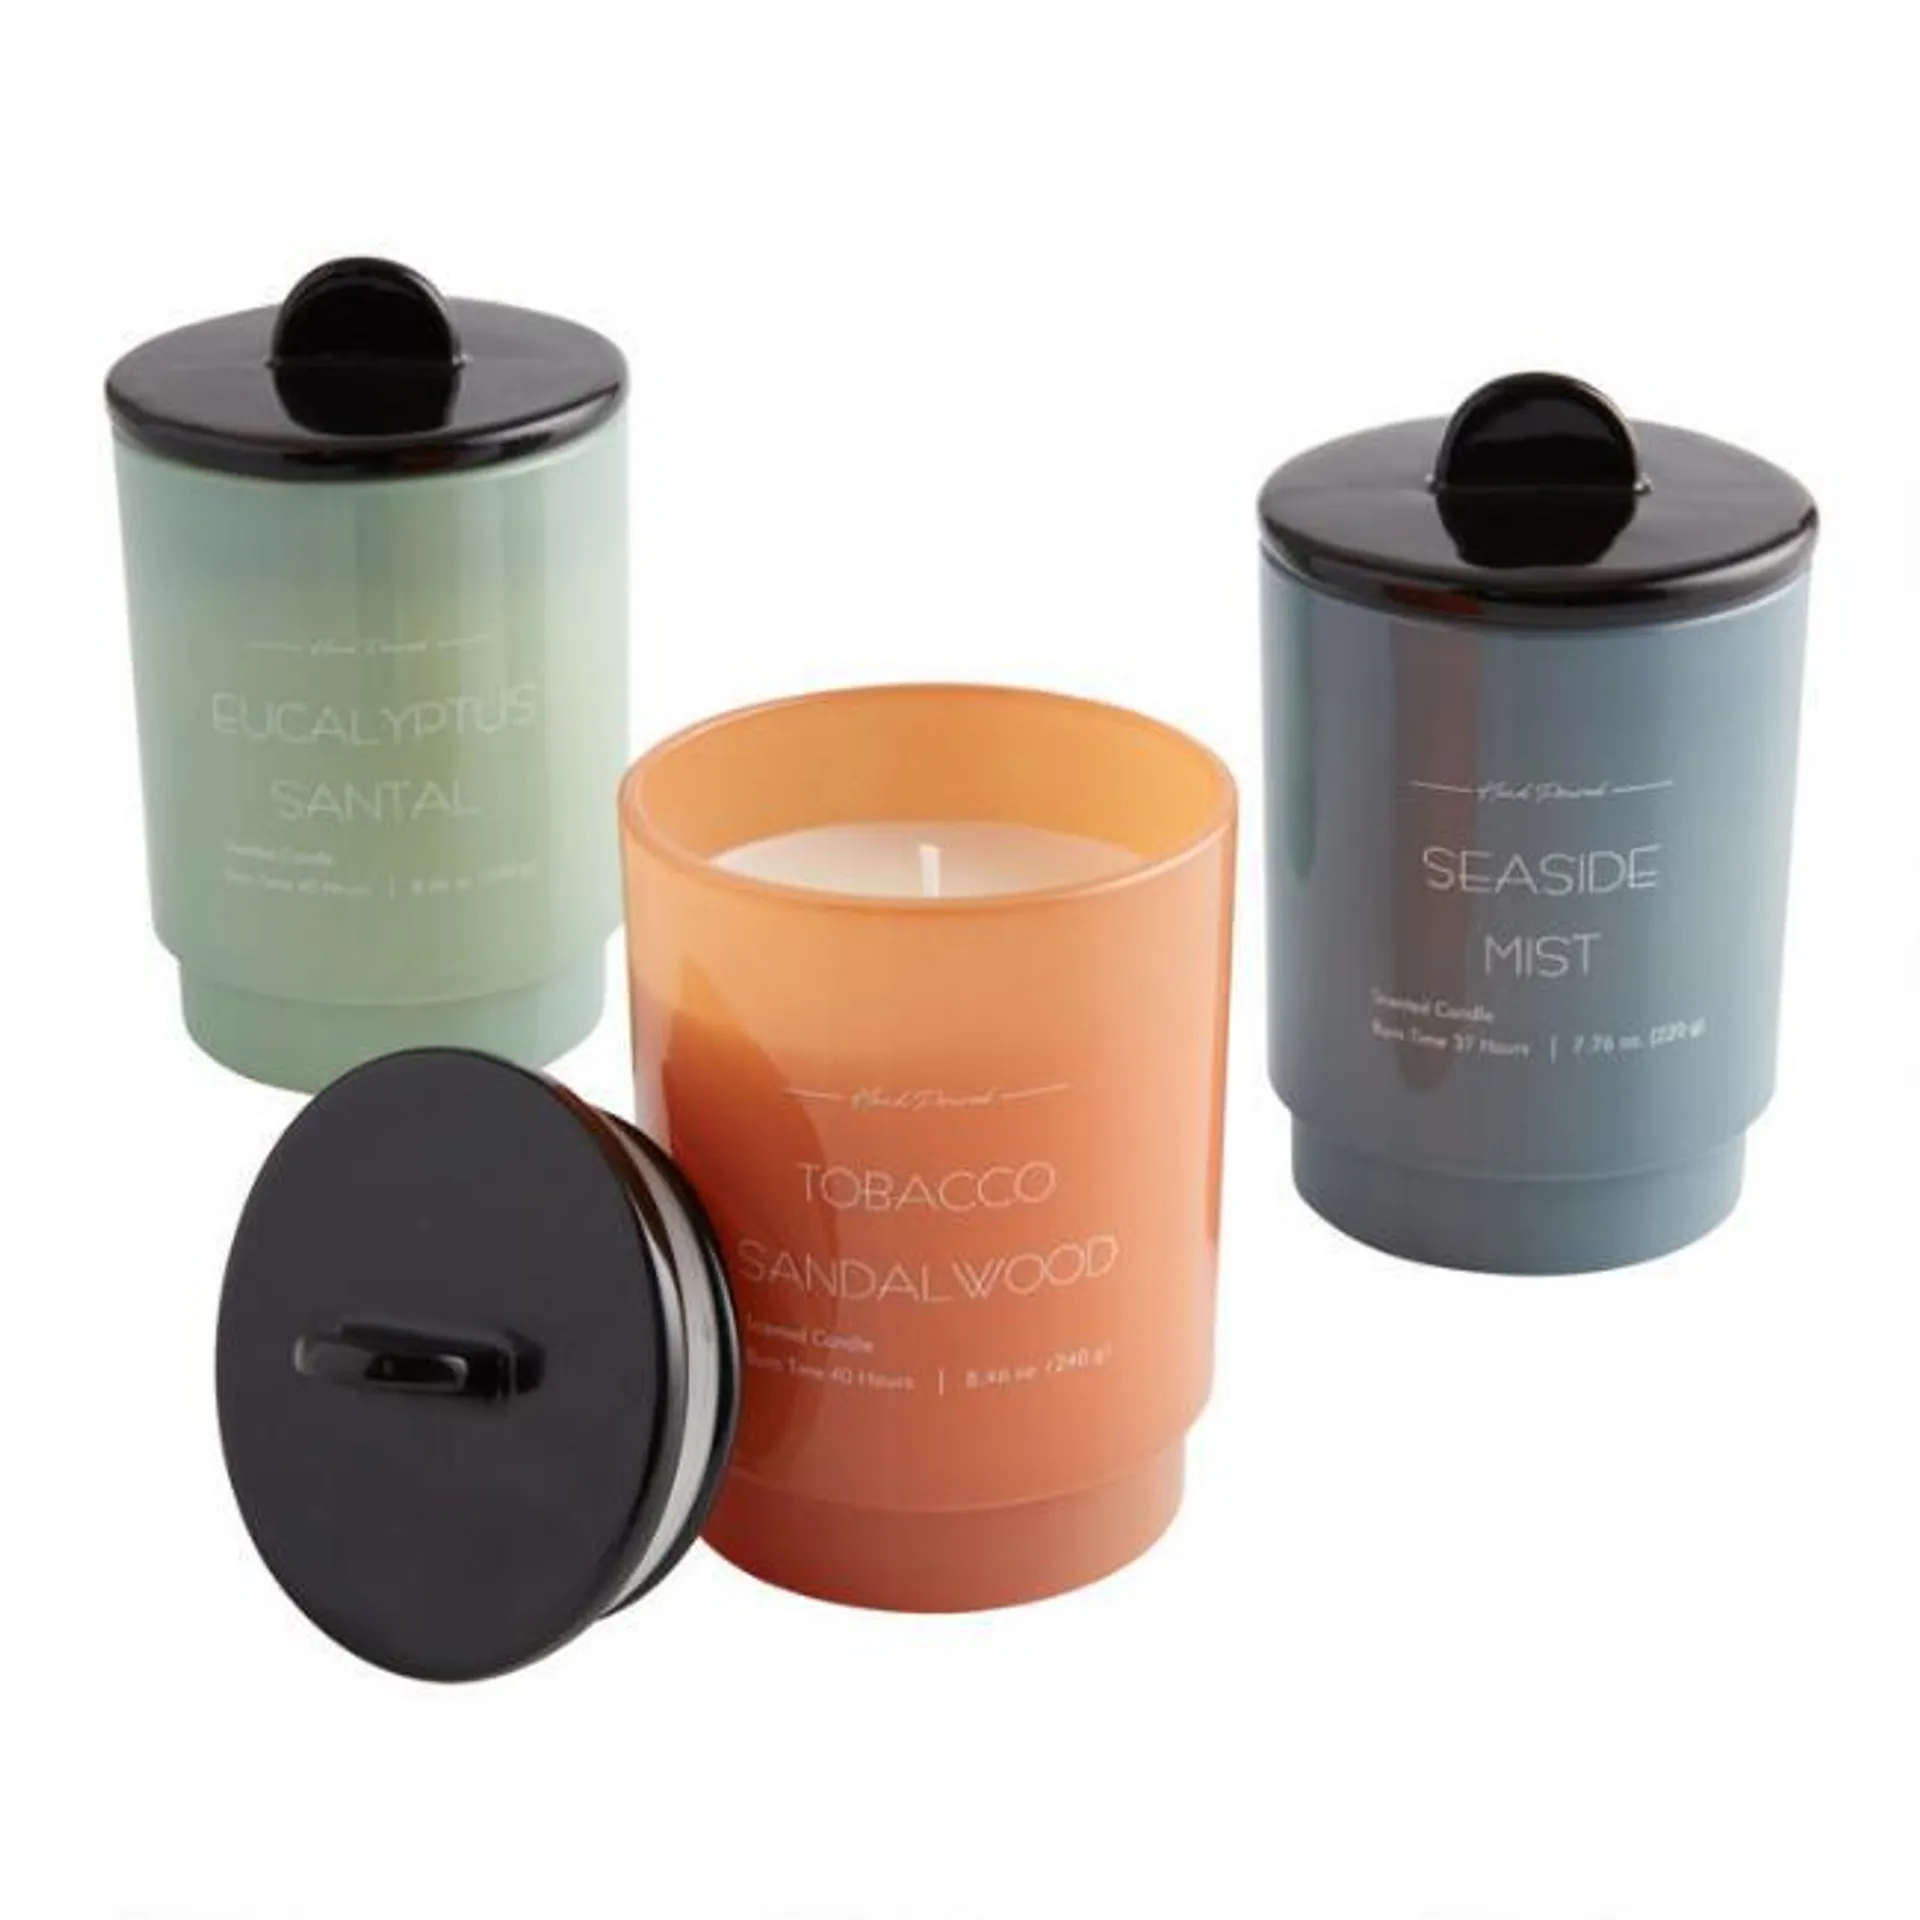 Glass Pedestal and Ceramic Lid Scented Candle